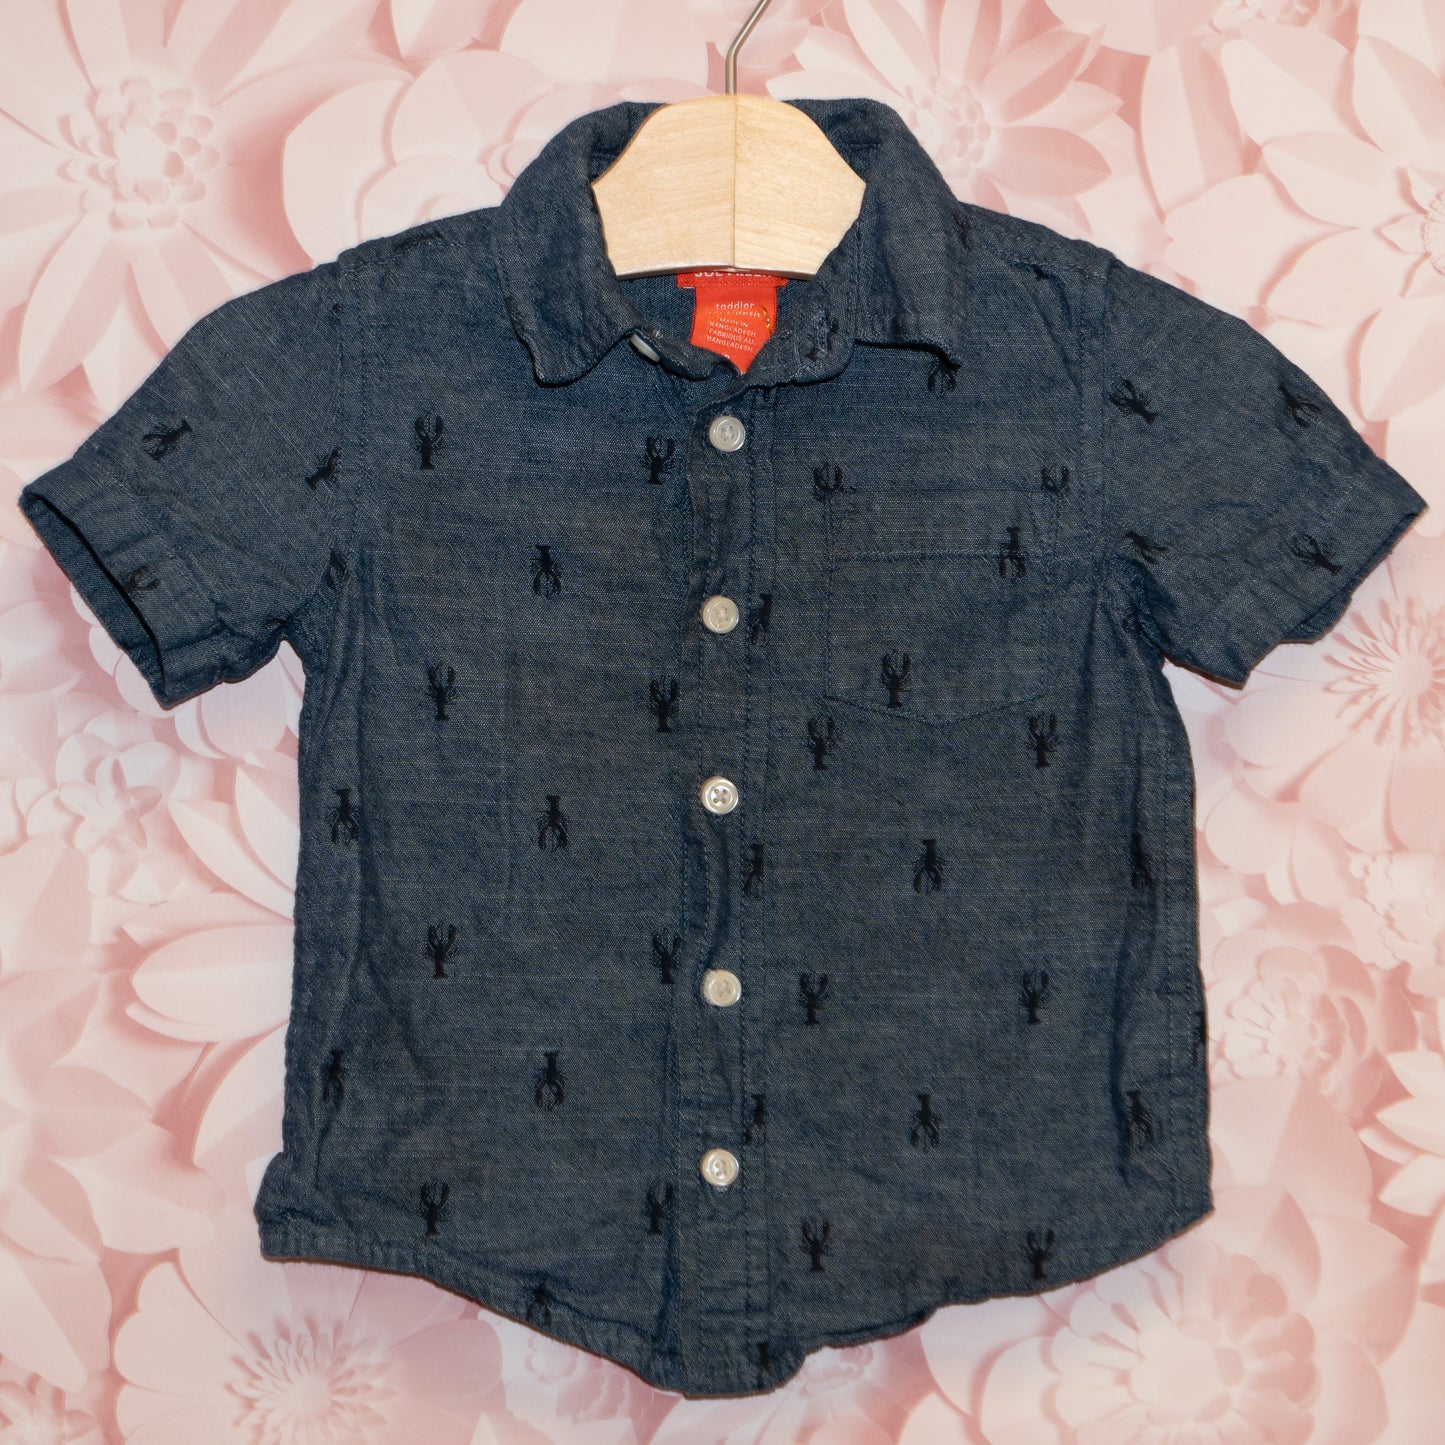 Lobster Shirt Size 3T